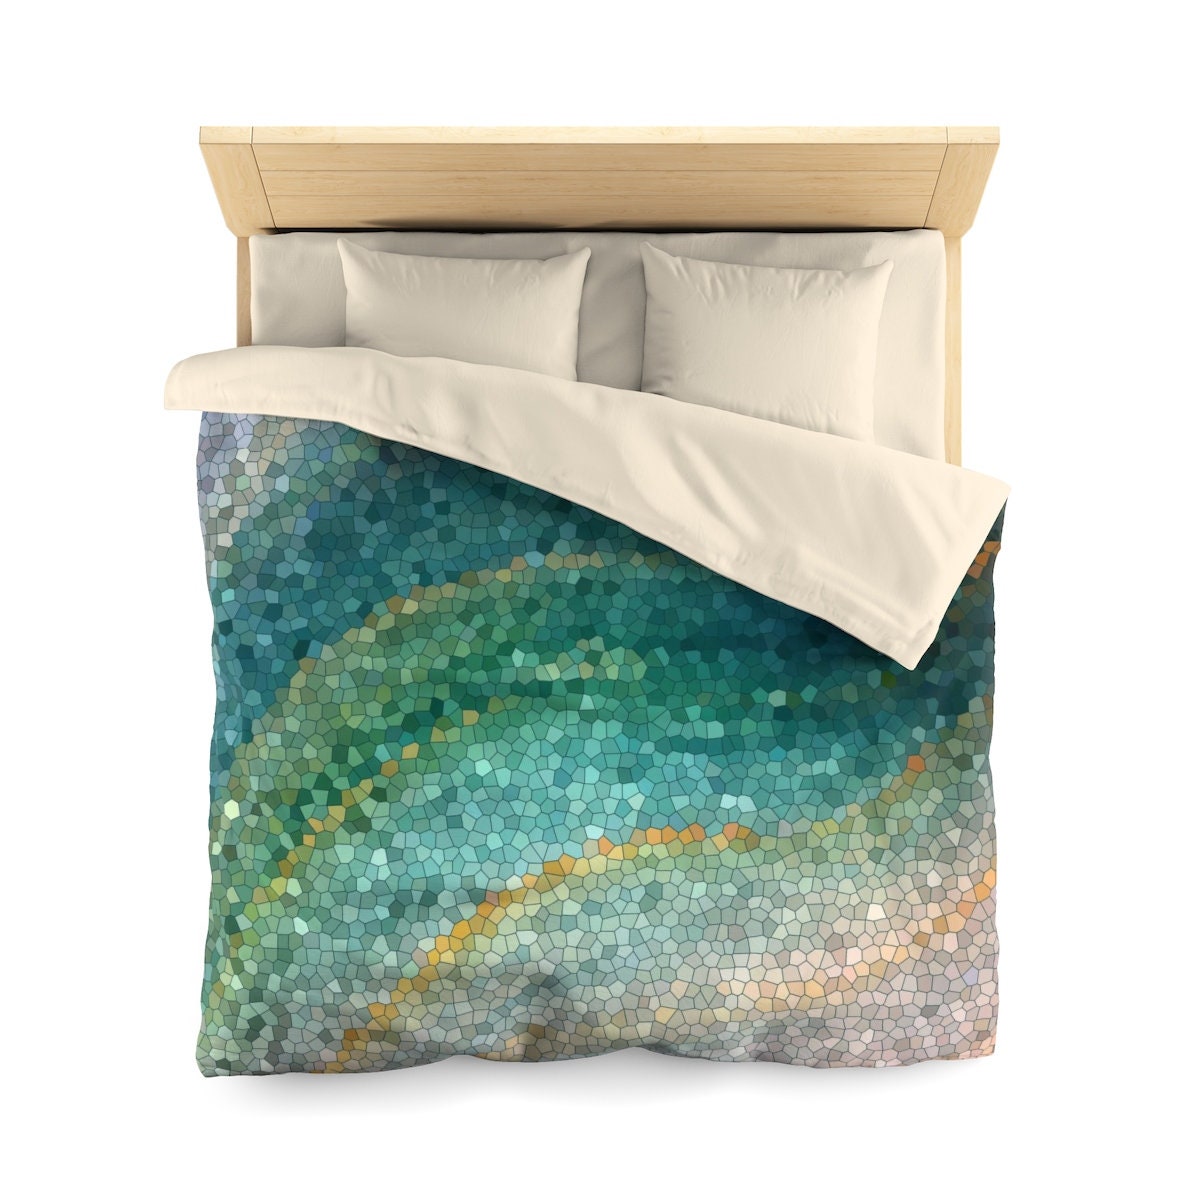 Luna King Bed Pillow Cover Set in Wistful Blue